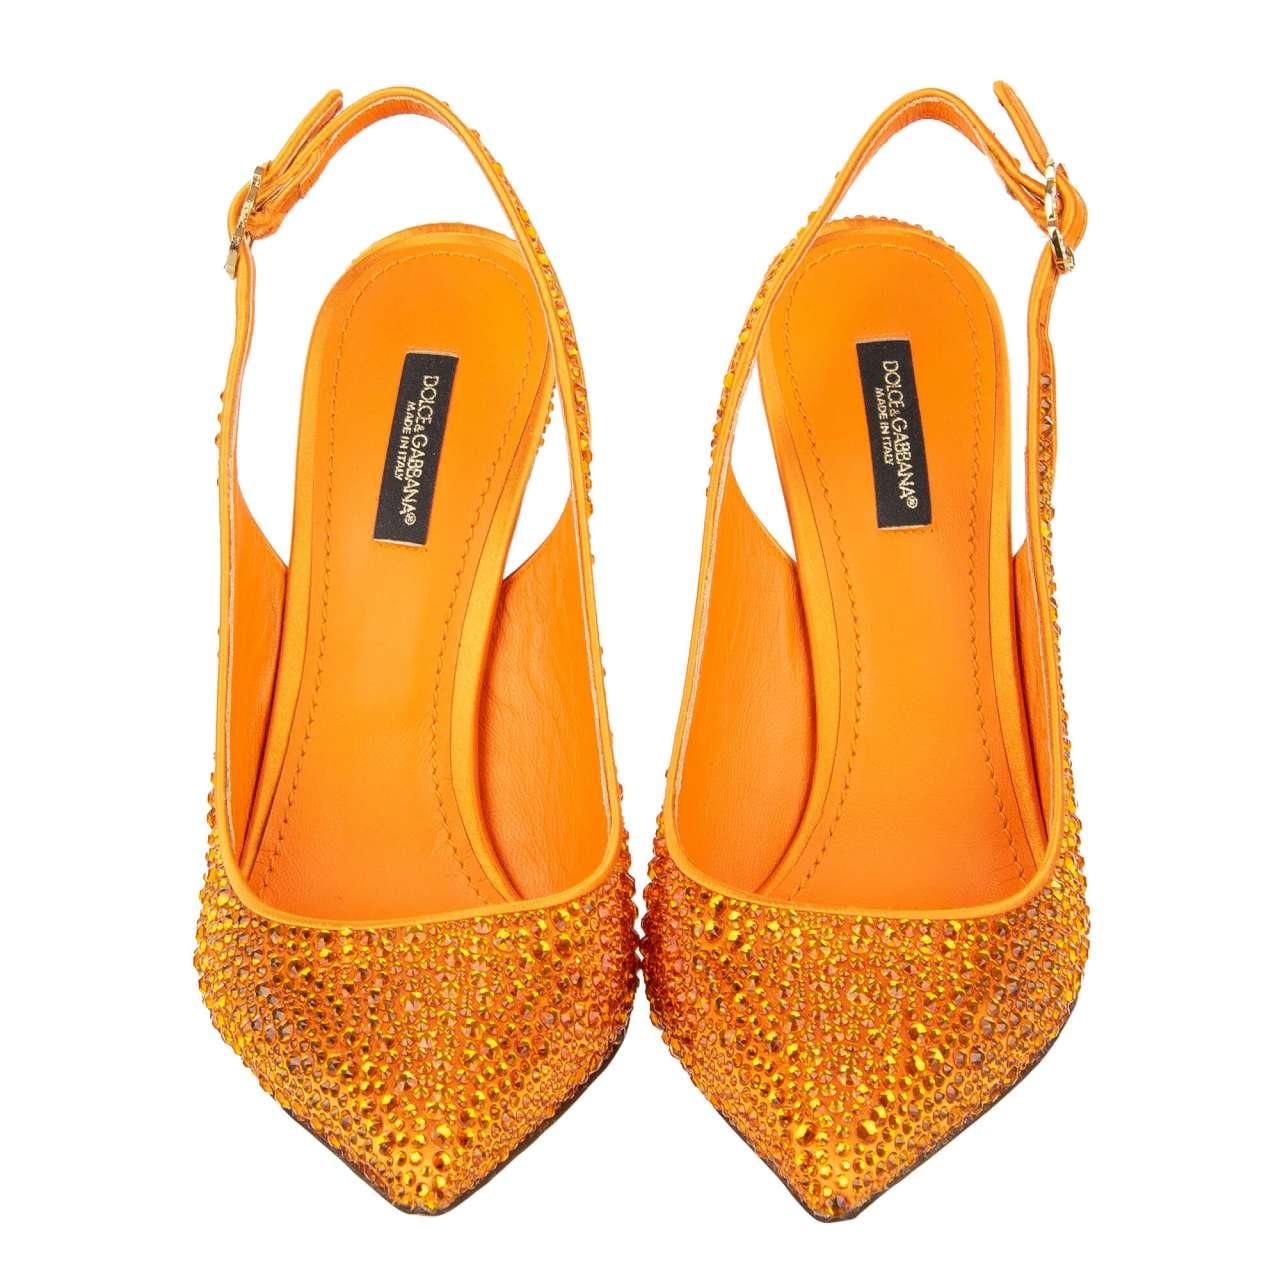 - Pointed Decollete Silk and Leather Slingback Pumps LORI in orange covered with crystals by DOLCE & GABBANA - New with Box - Former RRP: EUR 1.250 - MADE IN ITALY - Orange Crystals - Model: CG0267-AK040-8I229 - Material: 68% Viscose, 32% Silk -